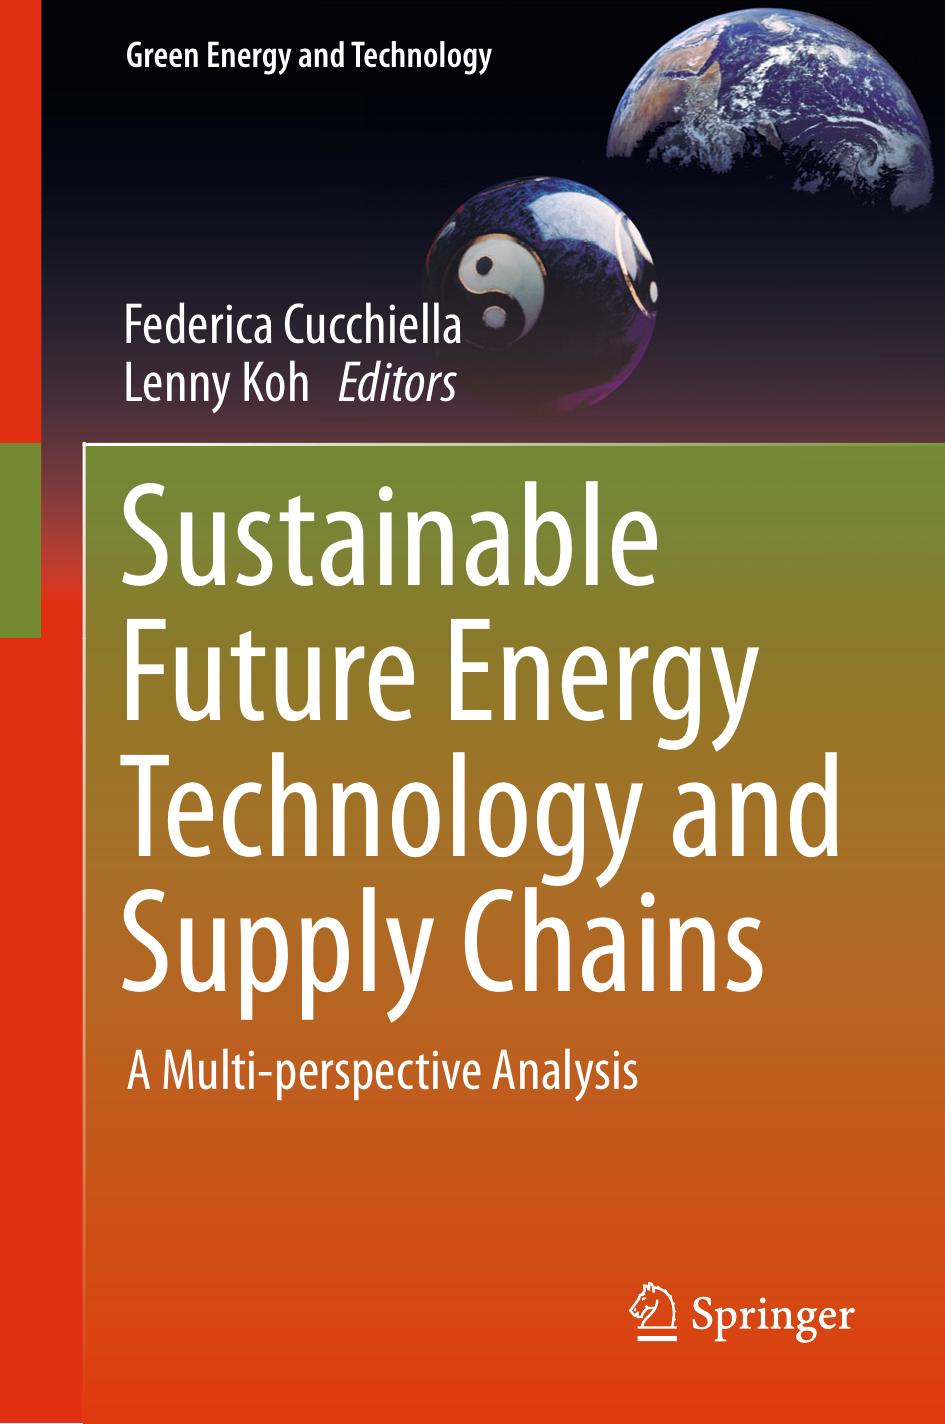 Sustainable Future Energy Technology and Supply Chains by A Multi-perspective Analysis (2015)